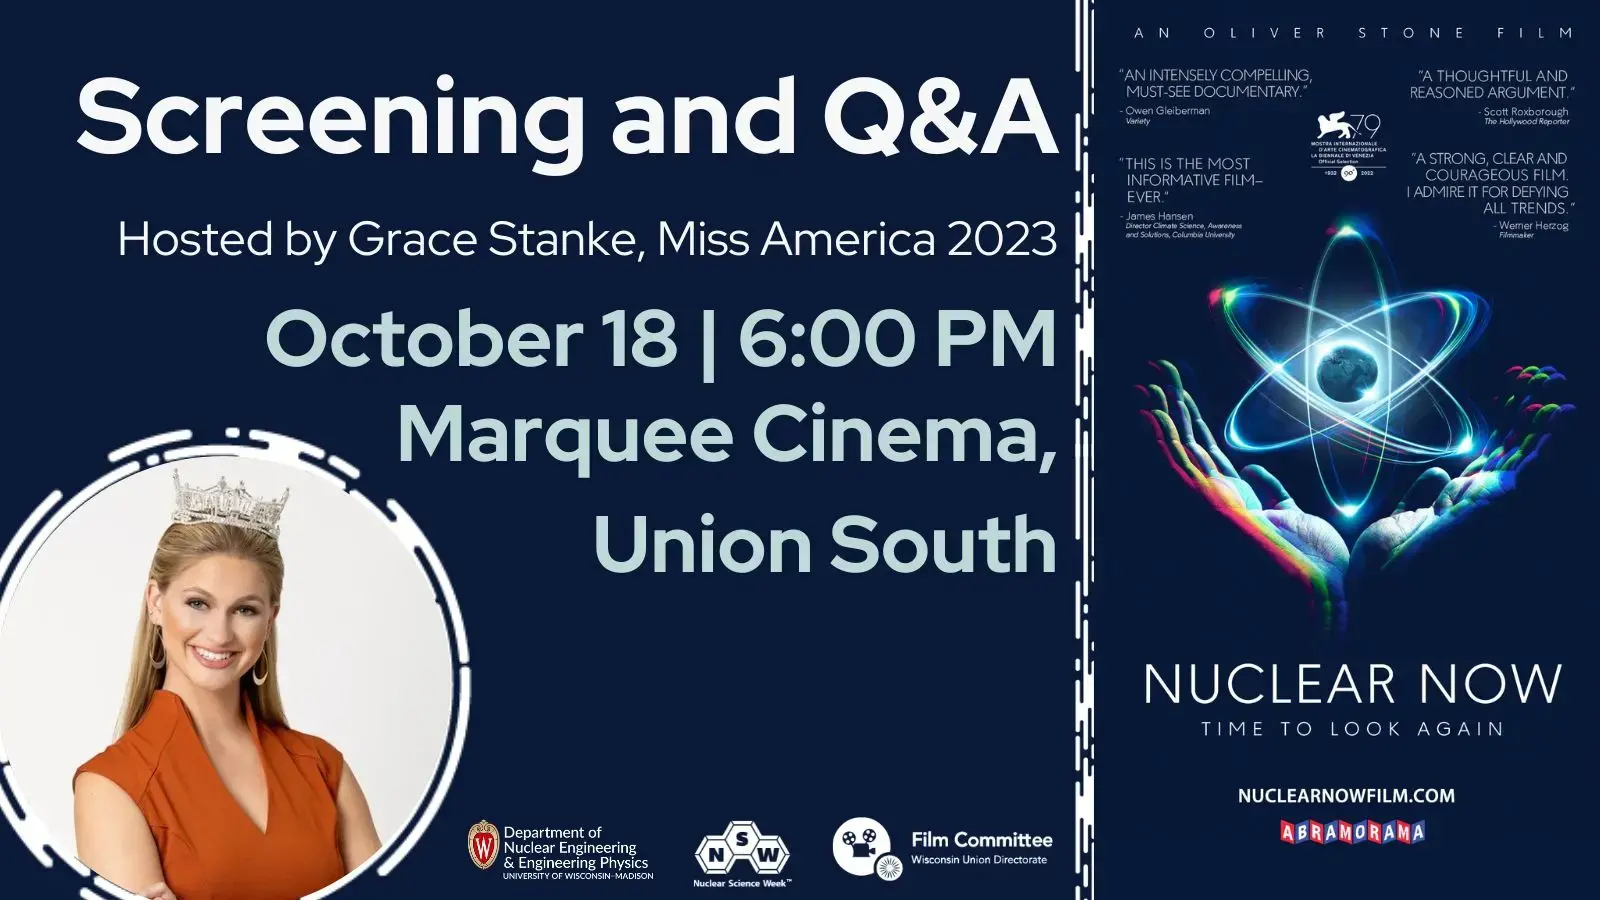 Grace Stanke, Miss America 2023; Nuclear Now poster; "Screening and Q&A; Hosted by Grace Stanke, Miss America 2023; October 18; 6:00 PM; Marquee Cinema, Union South"